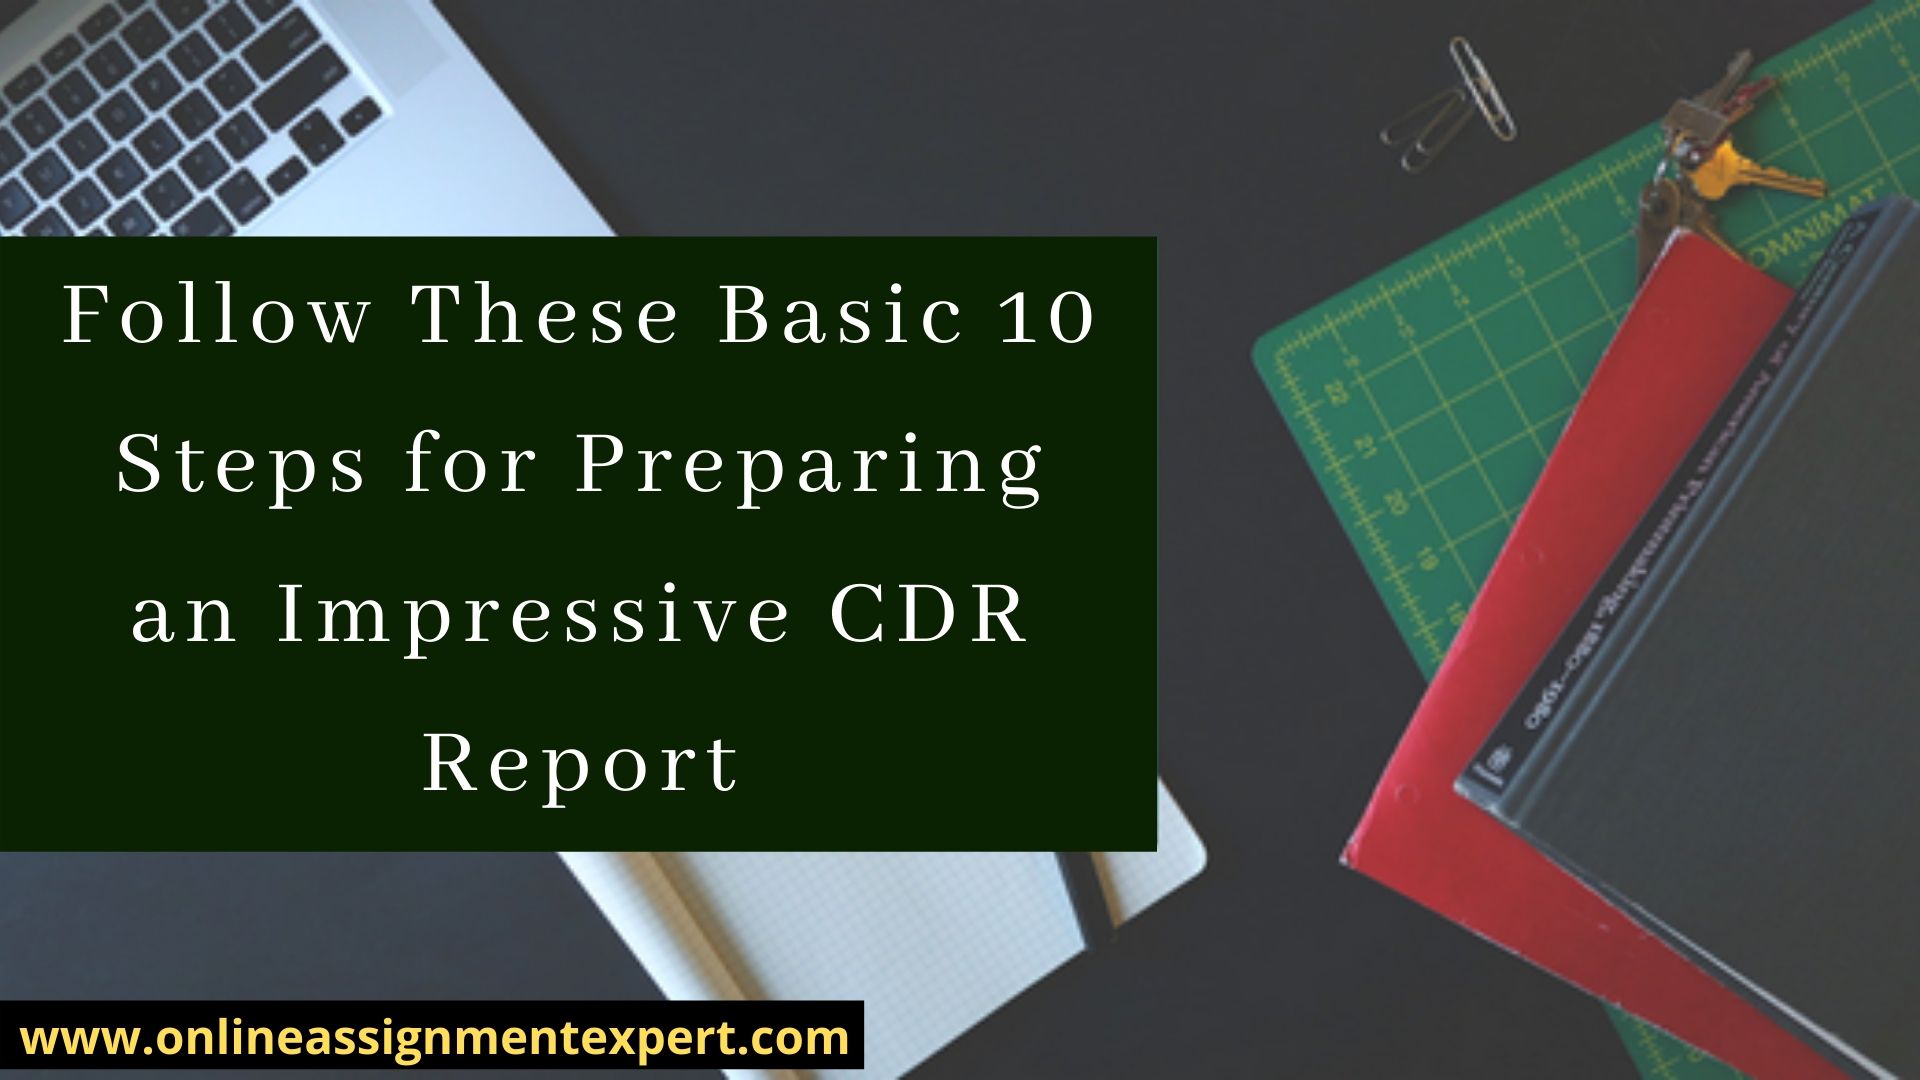 Follow These Basic 10 Steps for Preparing an Impressive CDR Report